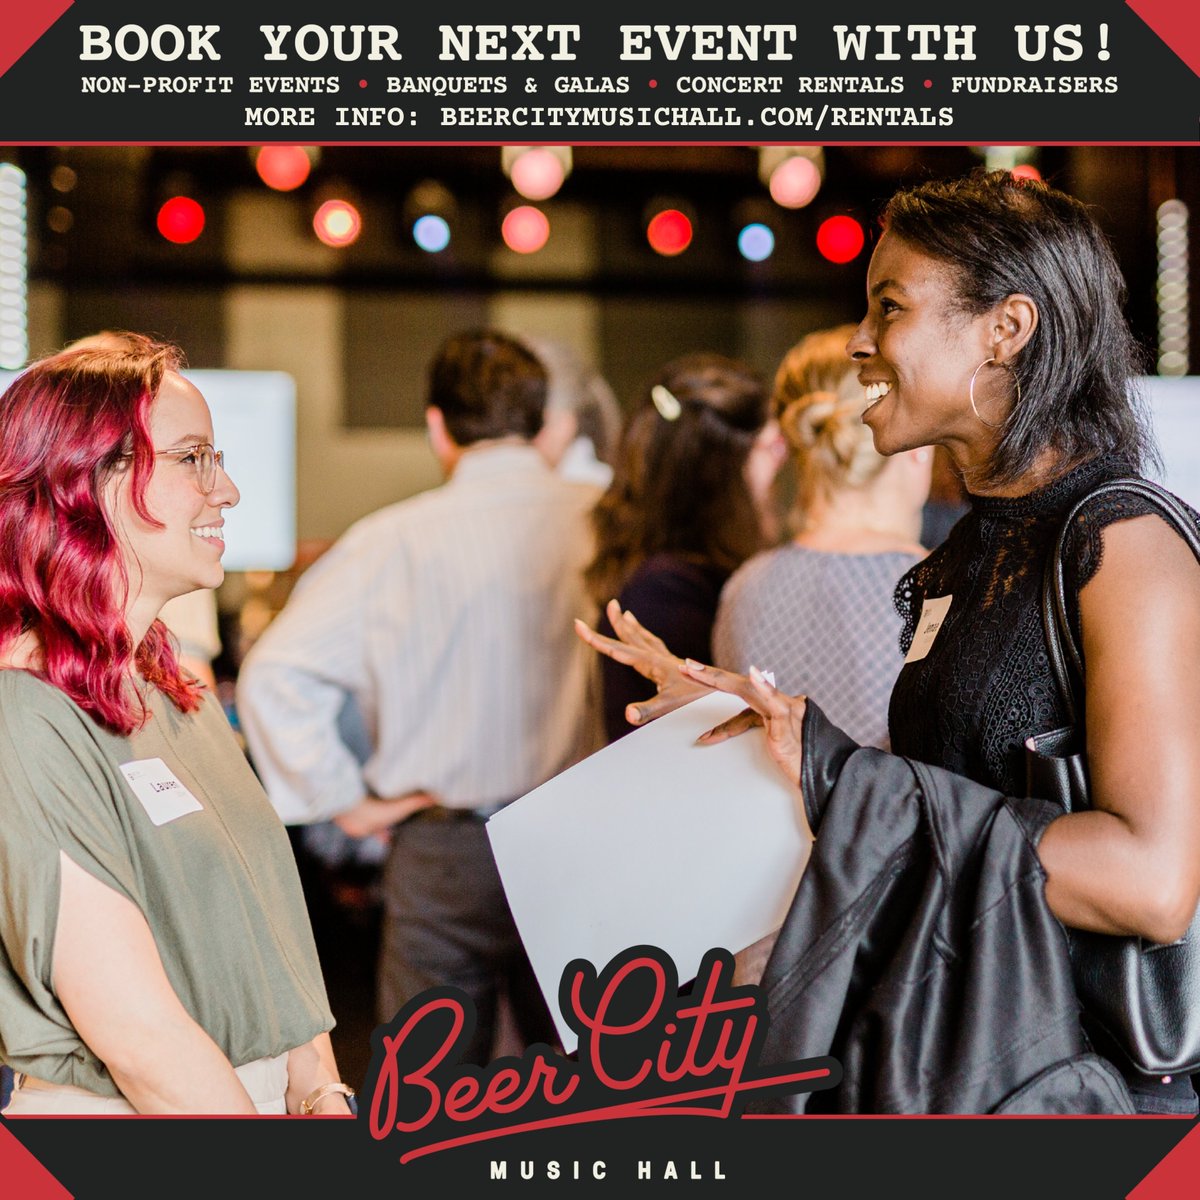 Host your holiday party with us! 🎉 No matter your size, we’ve got the perfect space for you and your office, your family, or even your friends! Find out more @ beercitymusichall.com/rentals